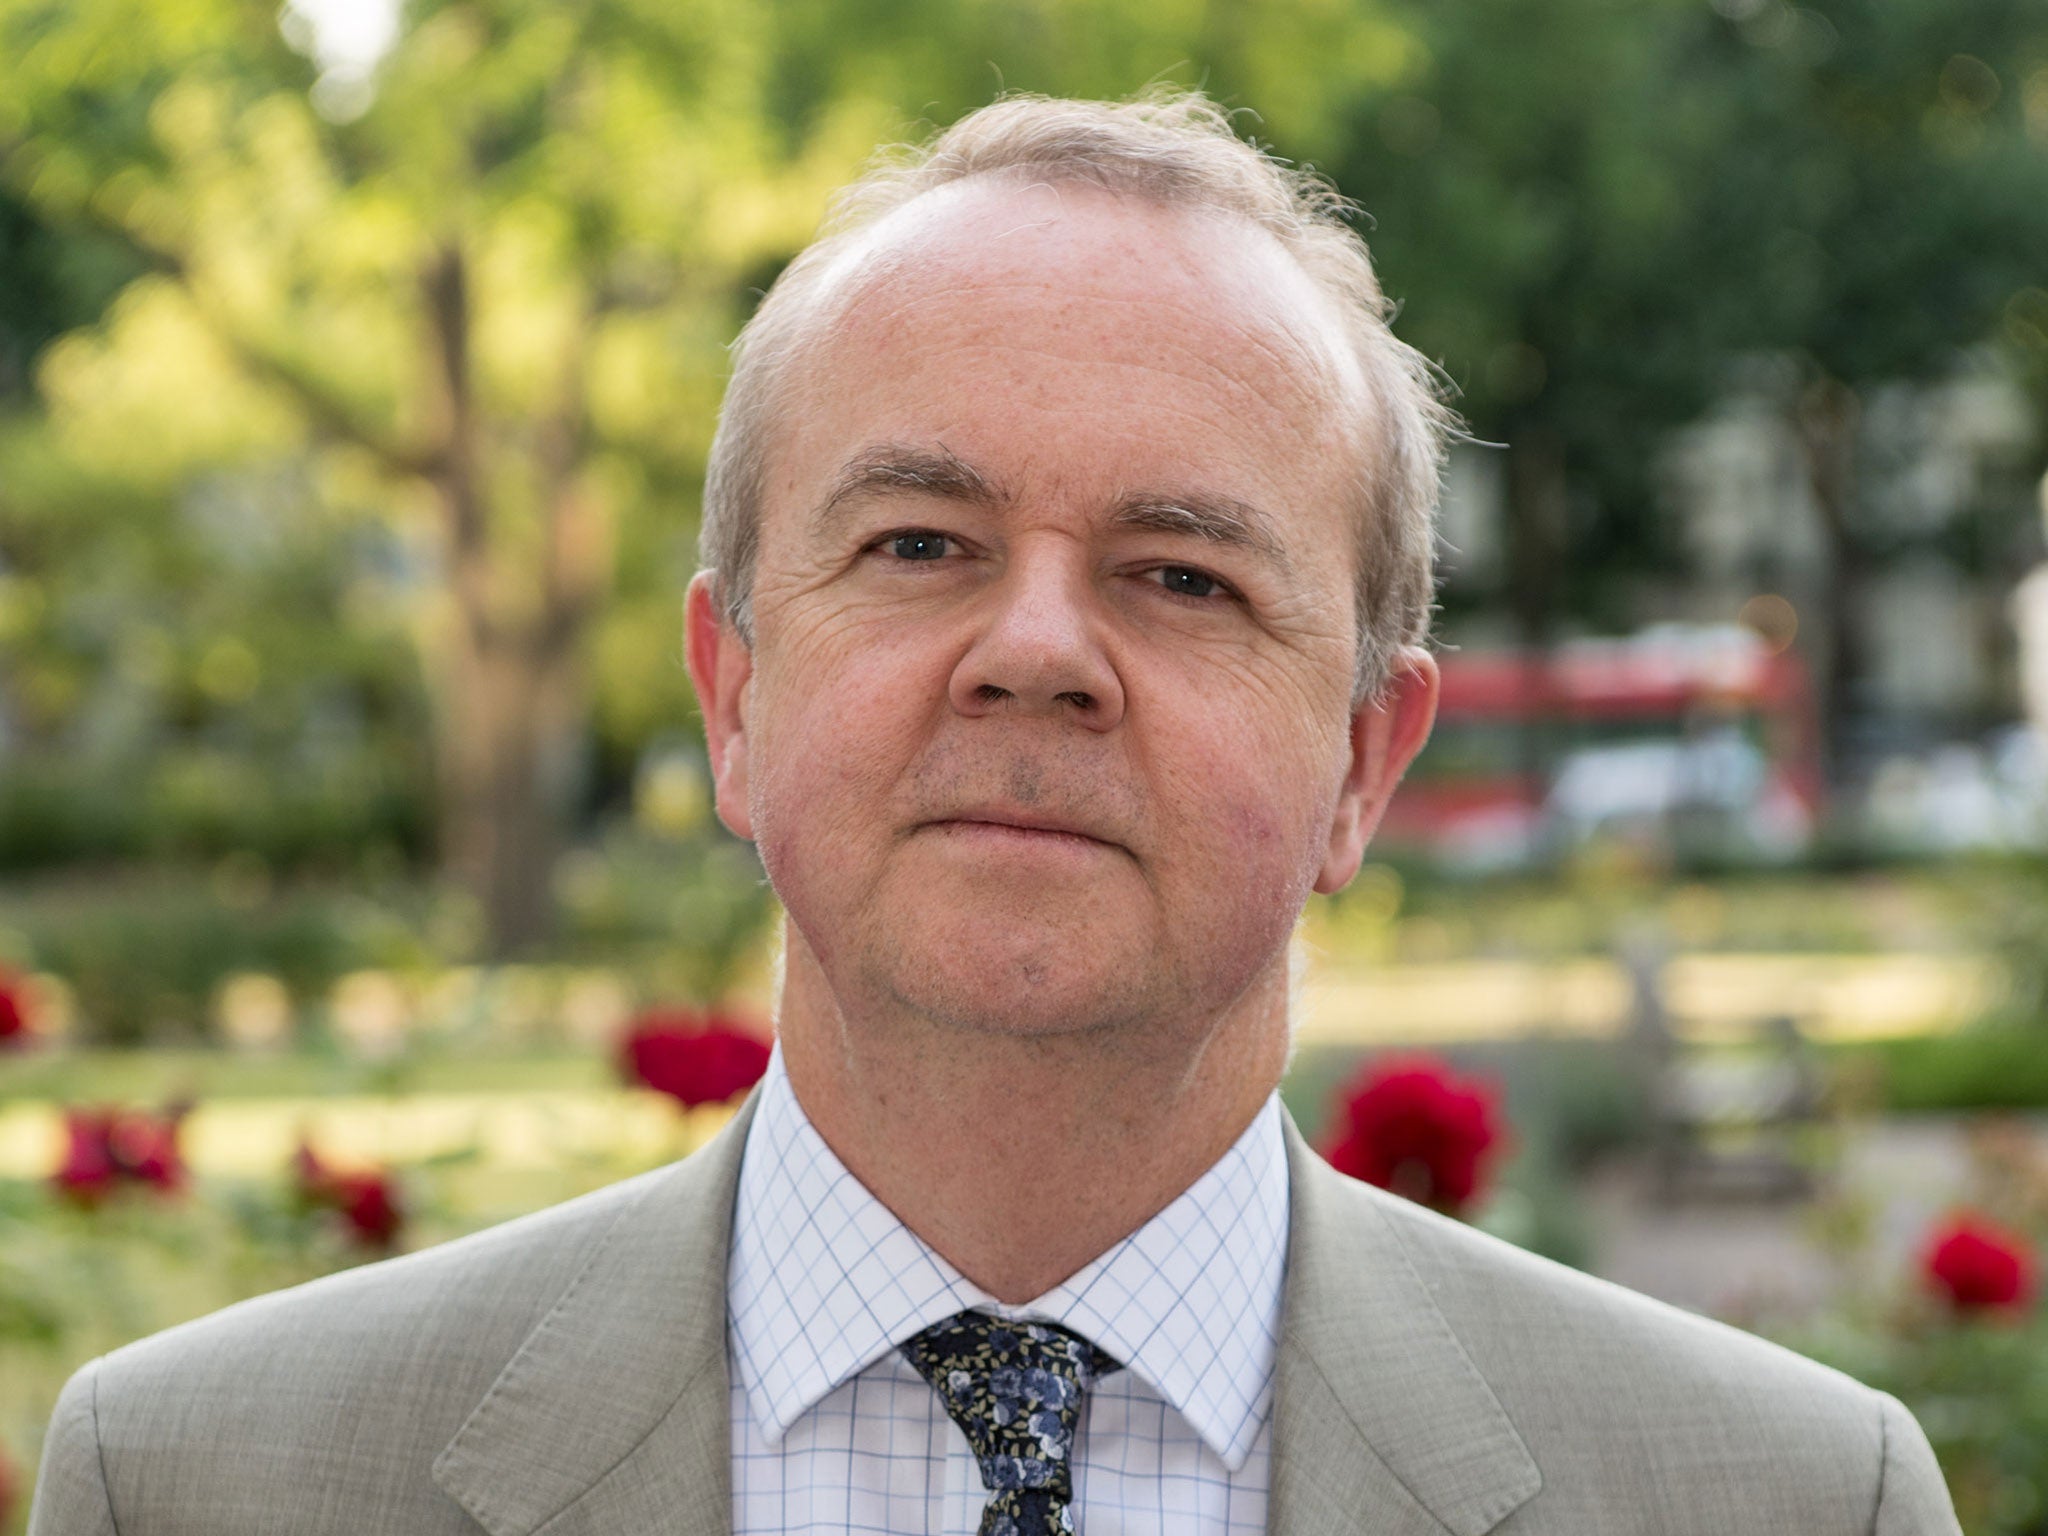 Ian Hislop declined to sign